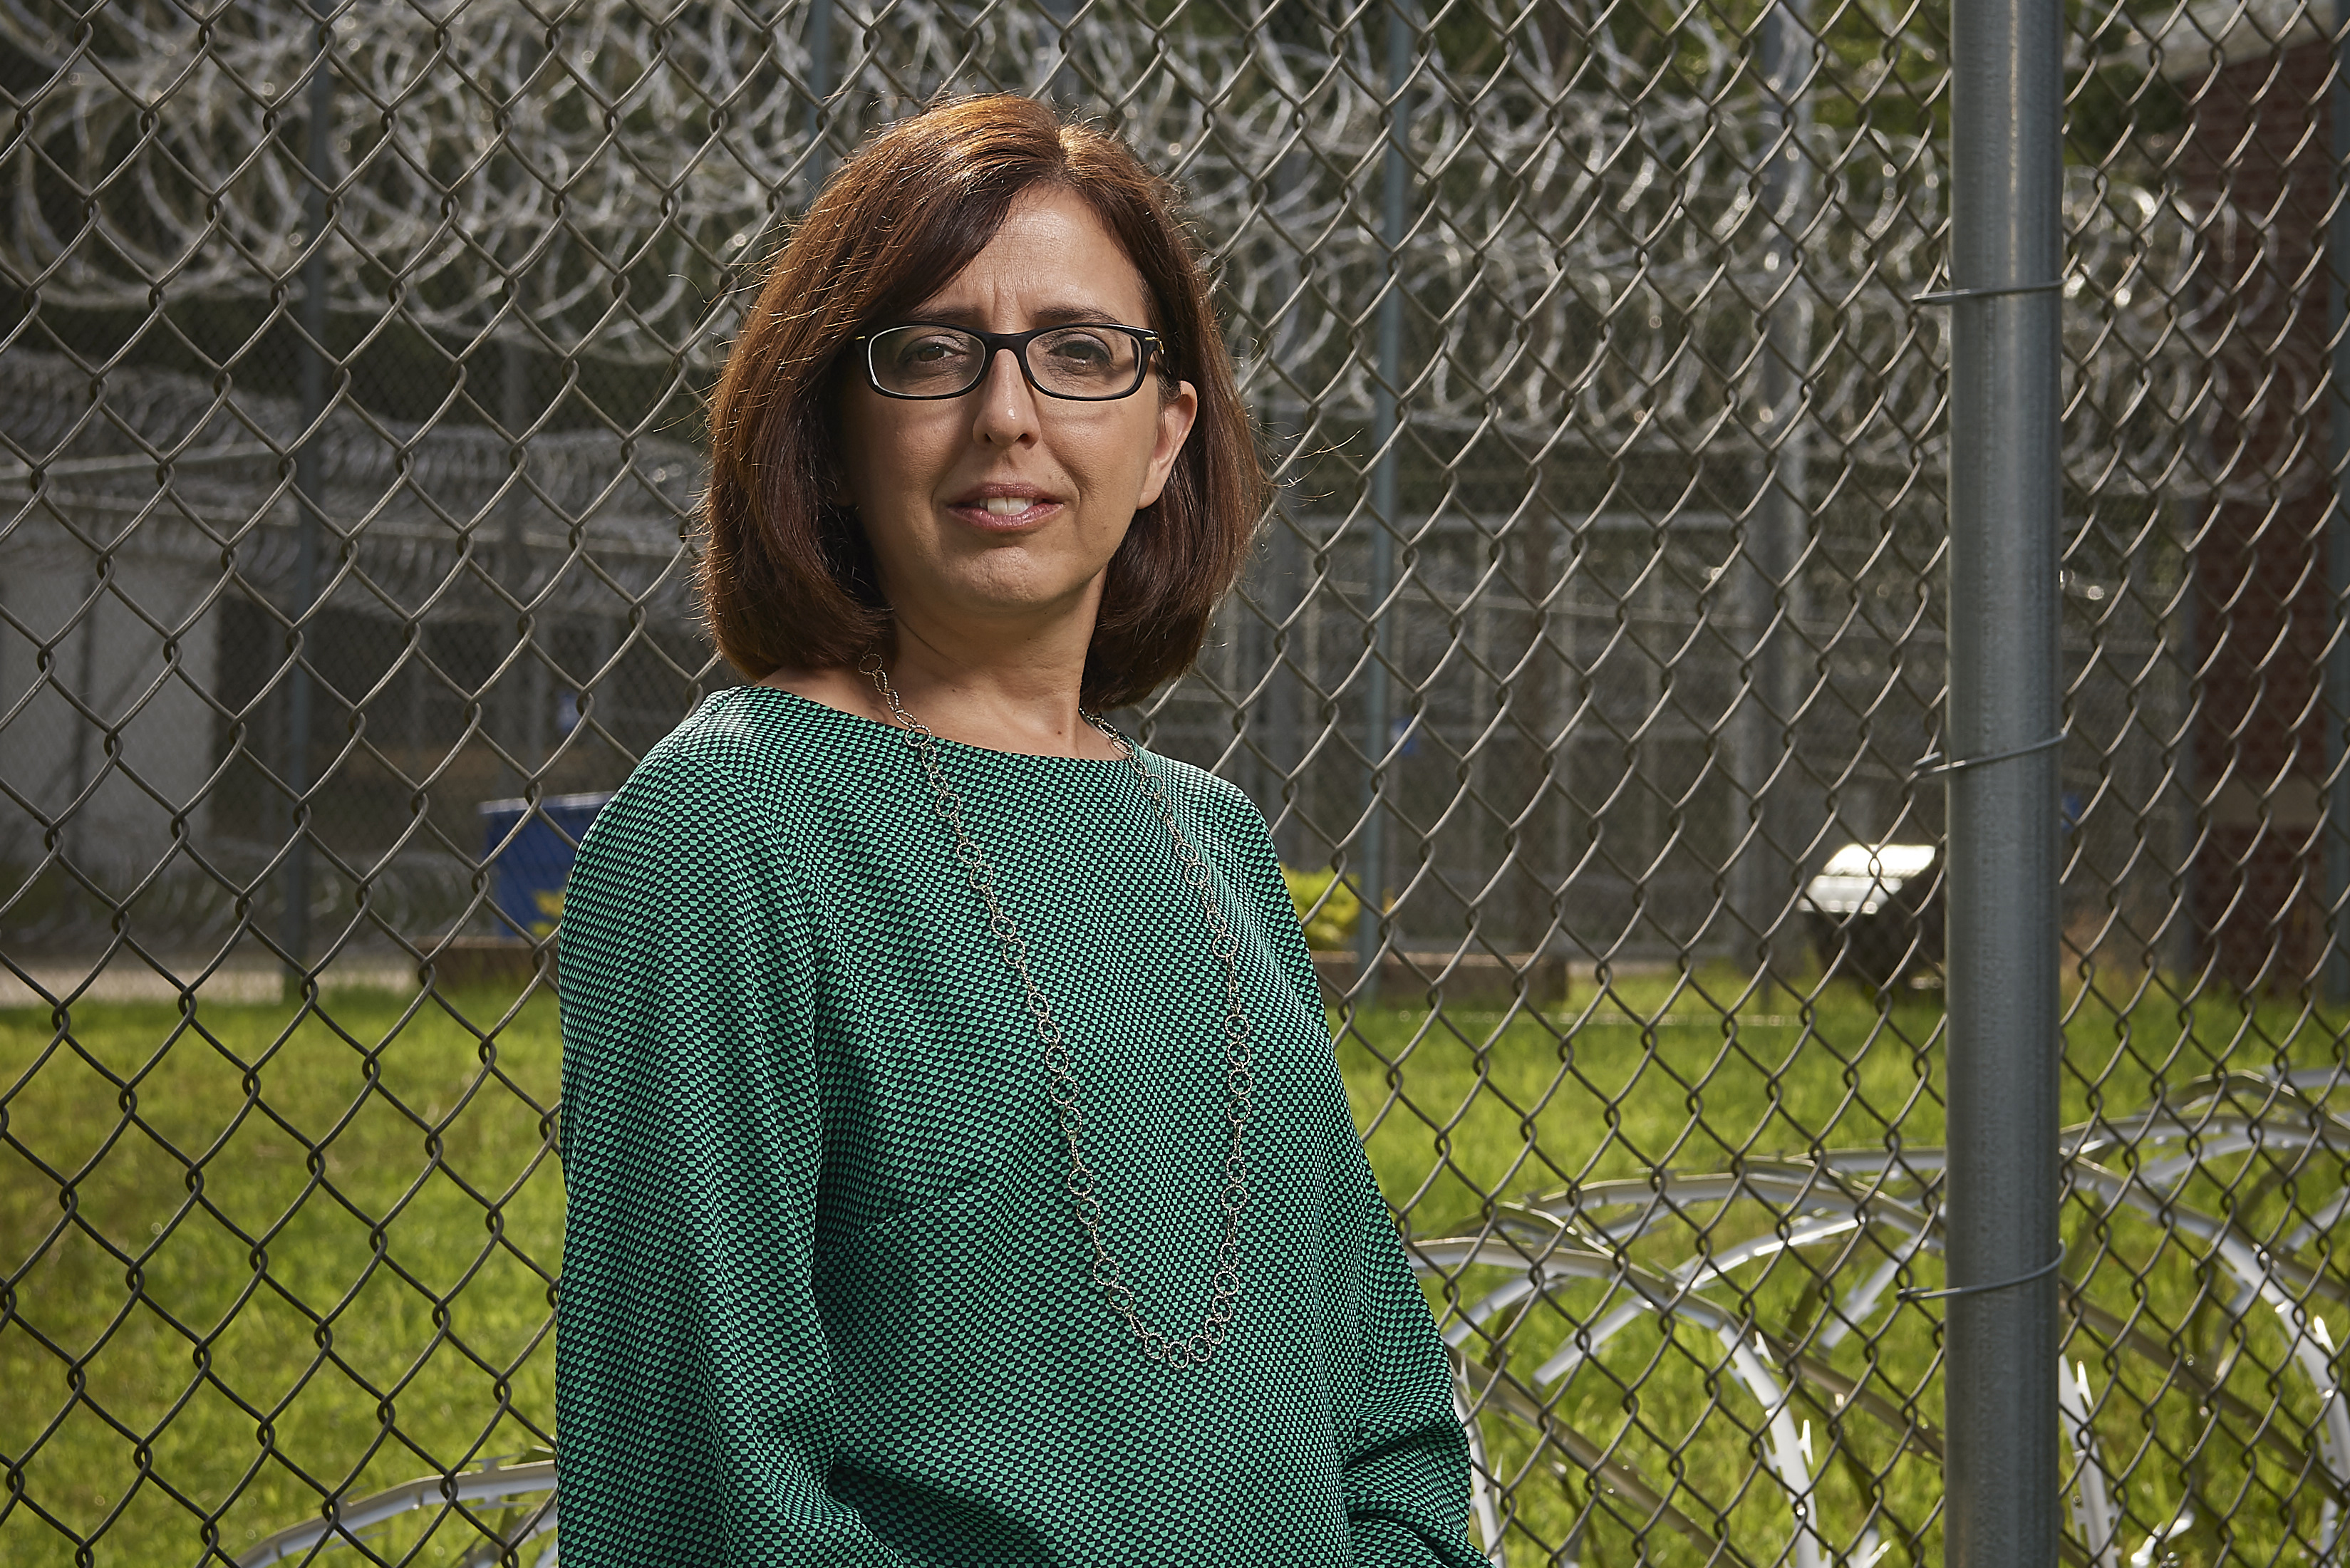 Kimberly Bergendahl, assistant professor in residence of political science at the Brooklyn Correctional Institution, onJuly 31, 2018. (Peter Morenus/UConn Photo)